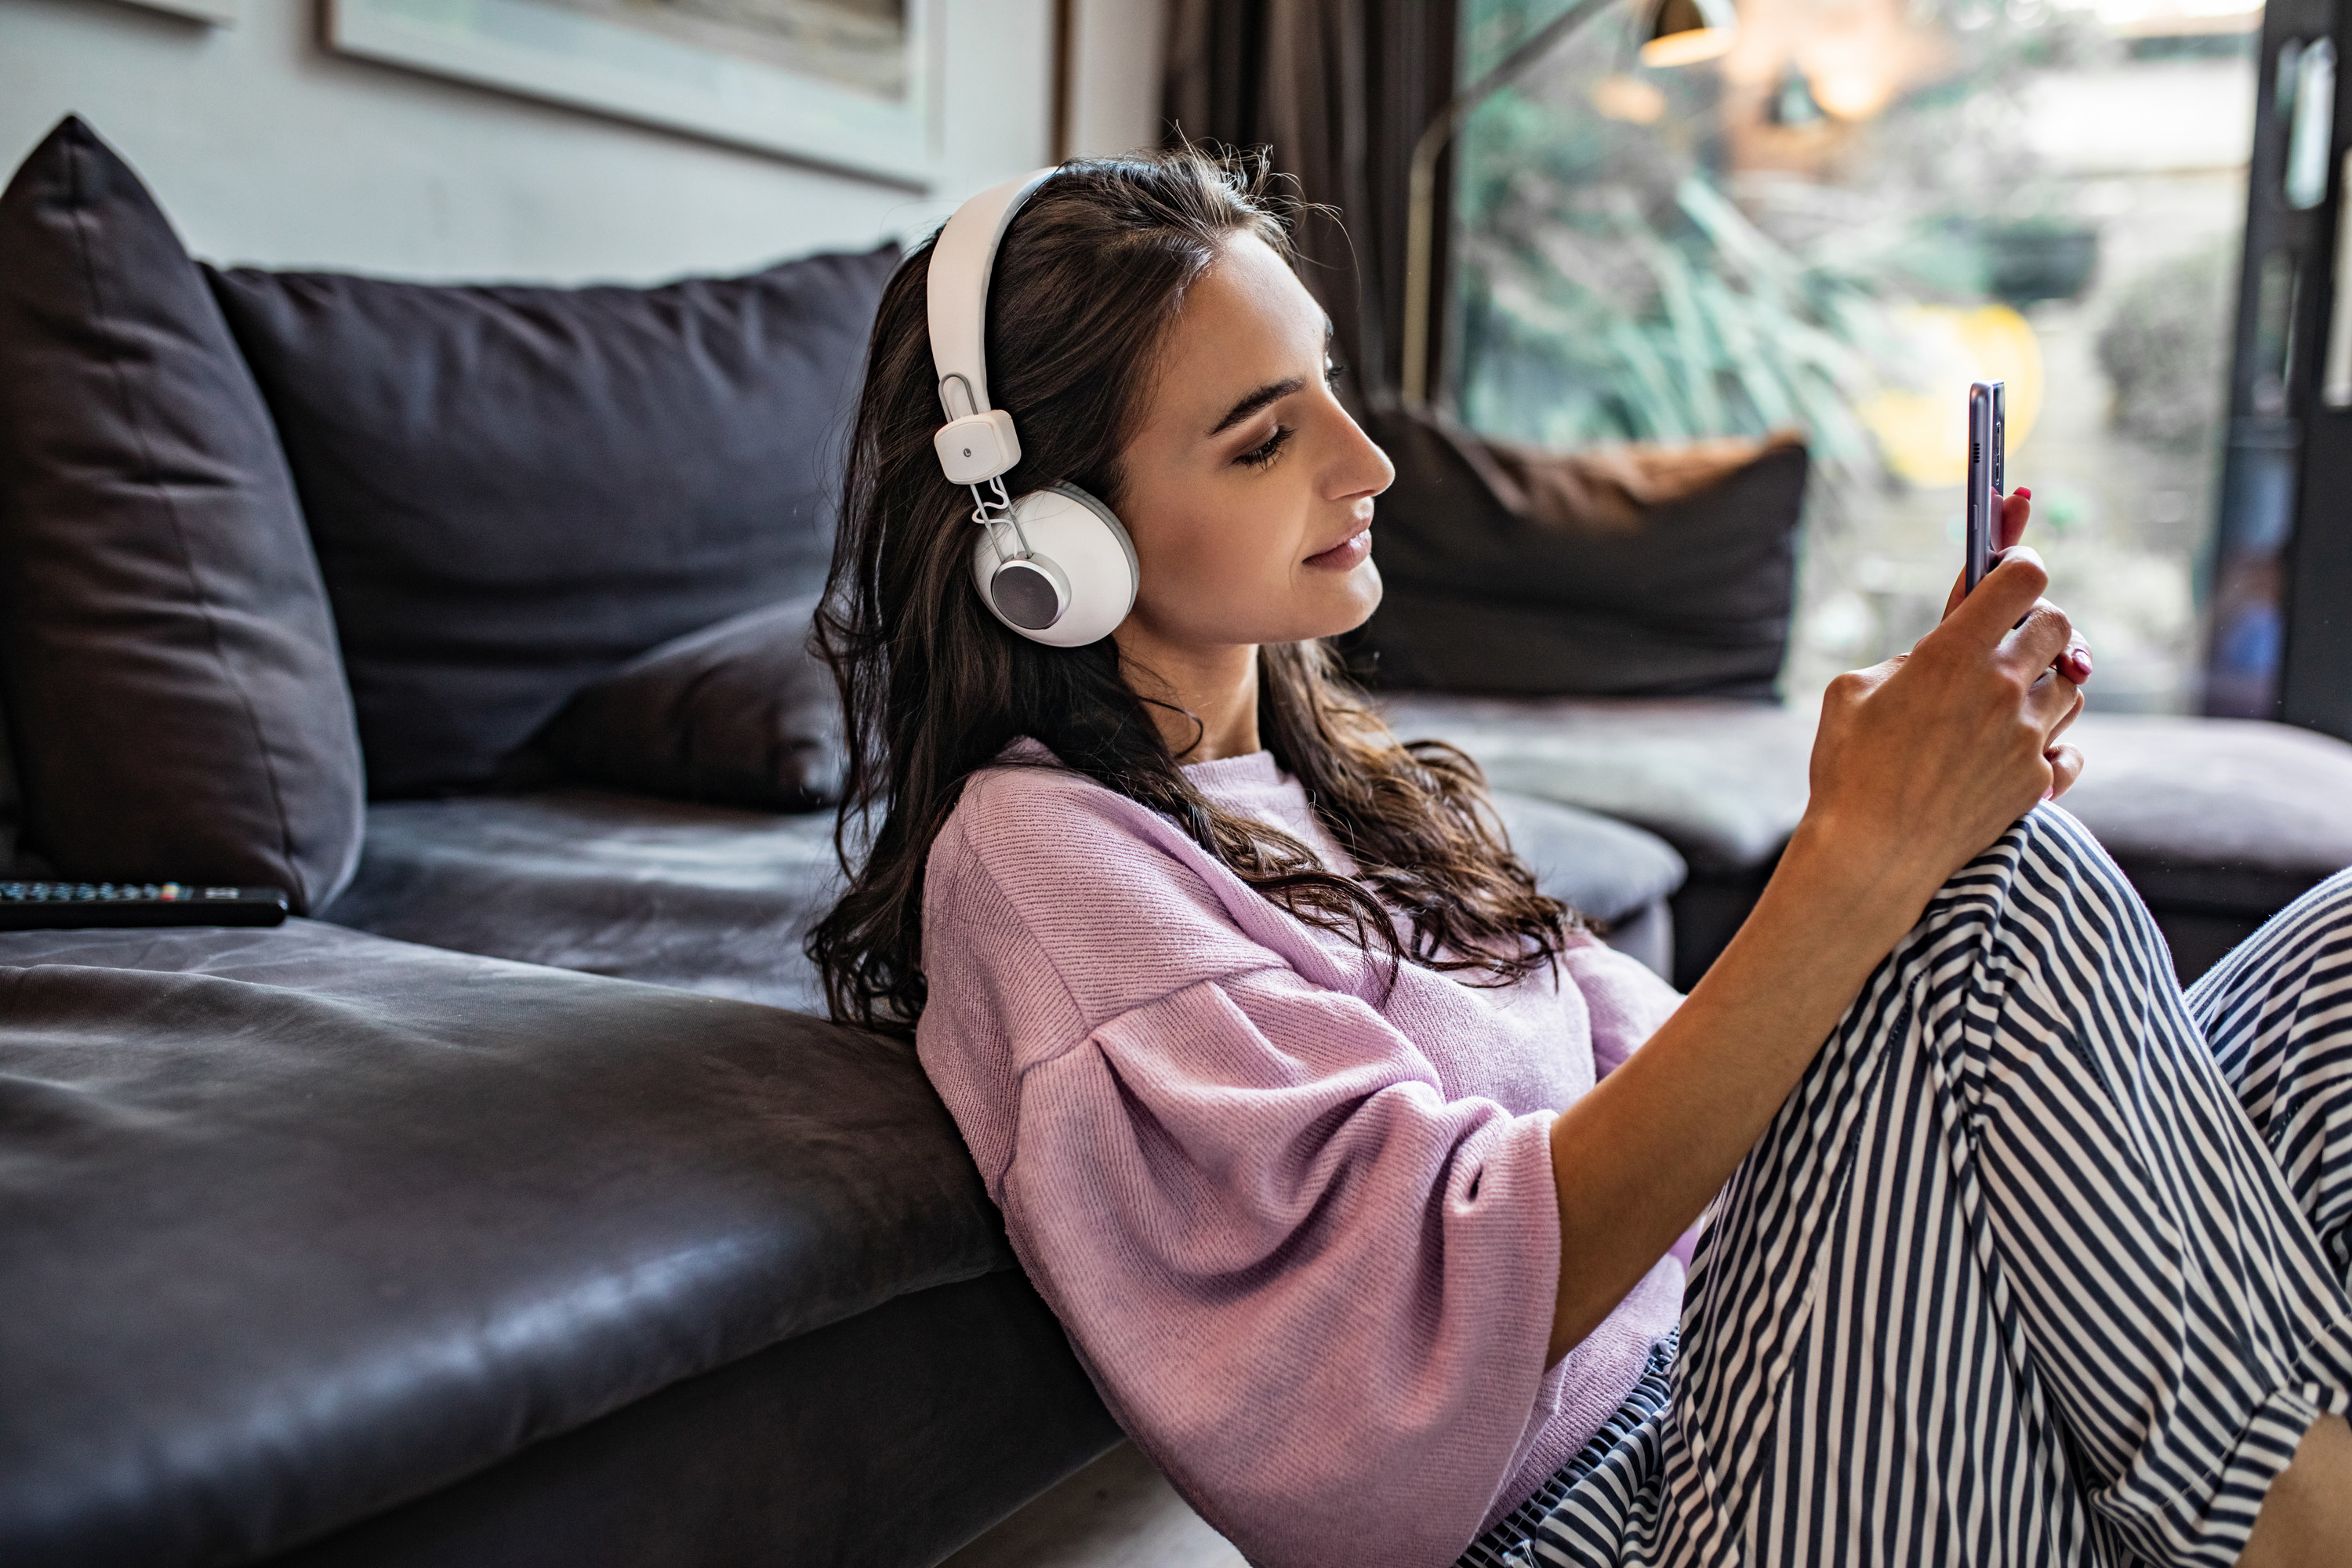 A girl in a pink sweatshirt sitting against a couch listens to a podcast through headphones